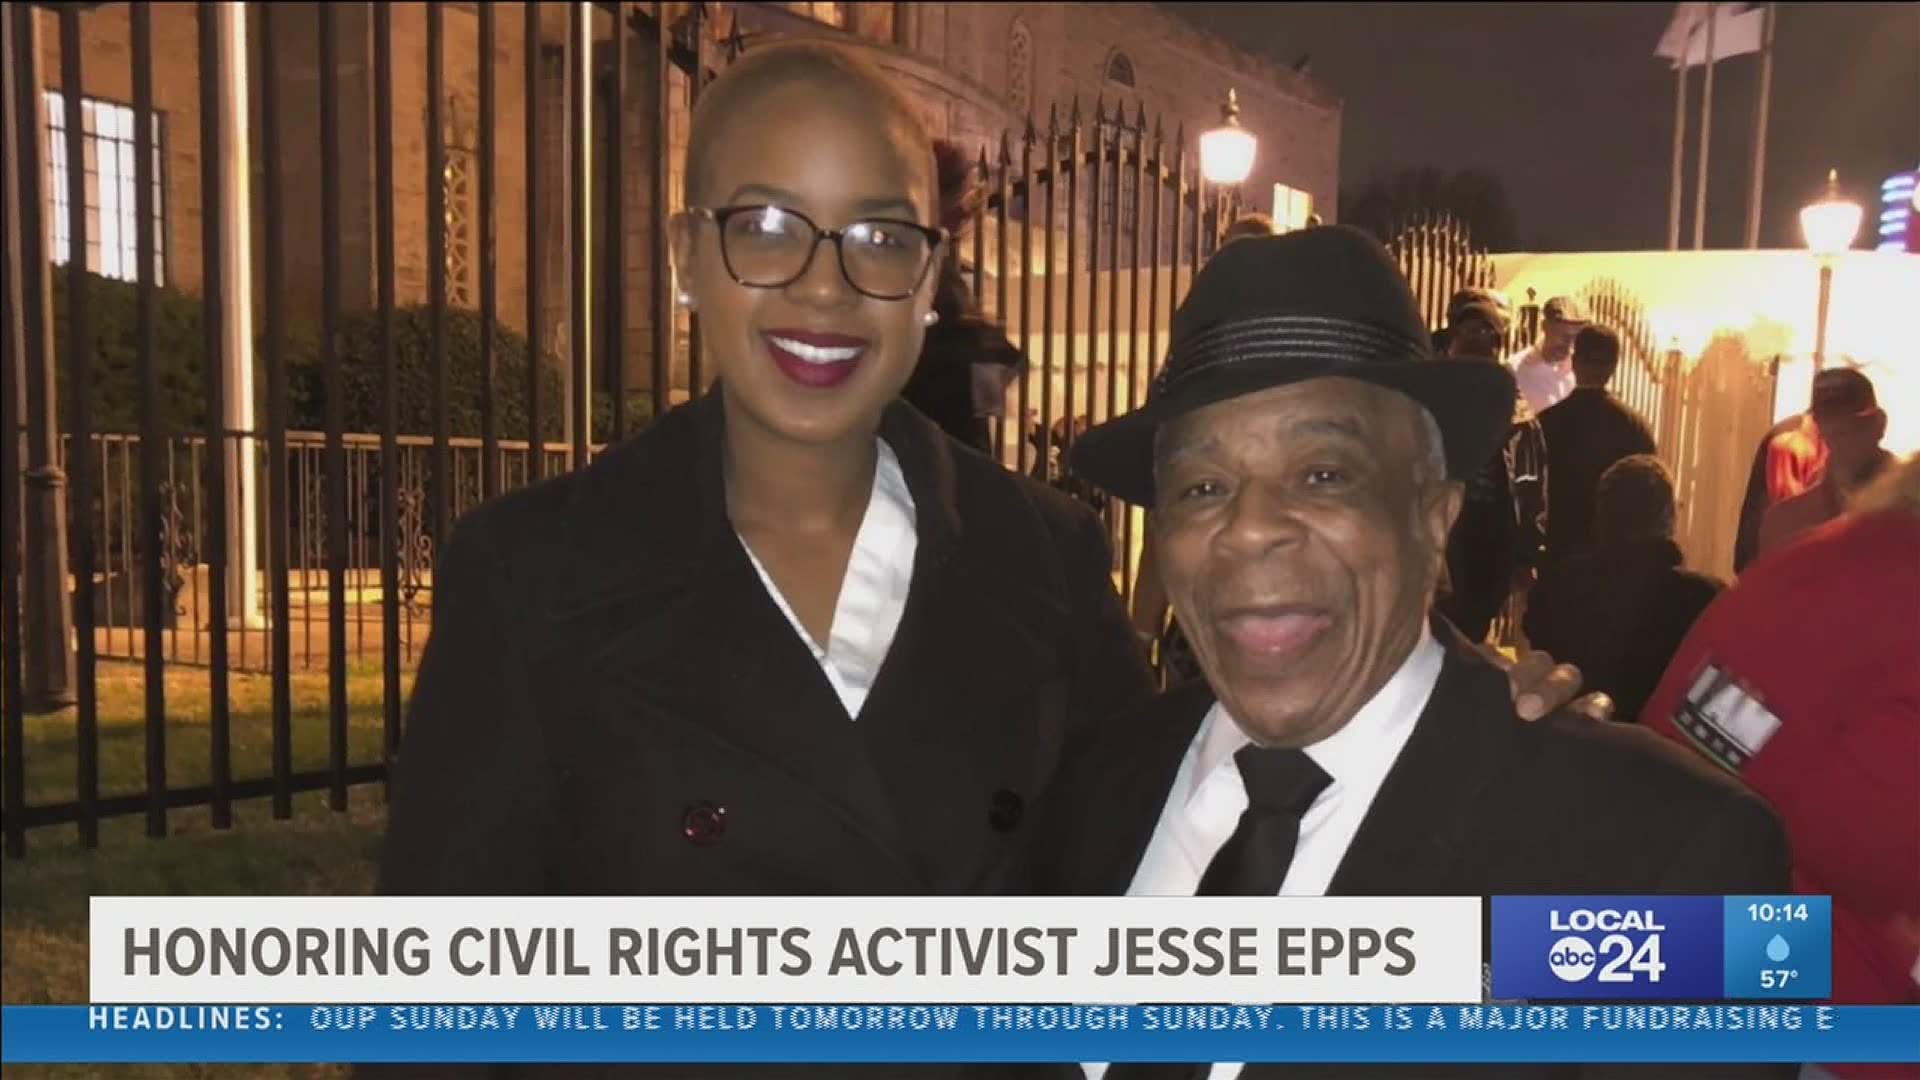 Jesse Epps, a civil rights activist who played a large role in the sanitation workers' strike in Memphis in 1968, is recognized during Black History Month